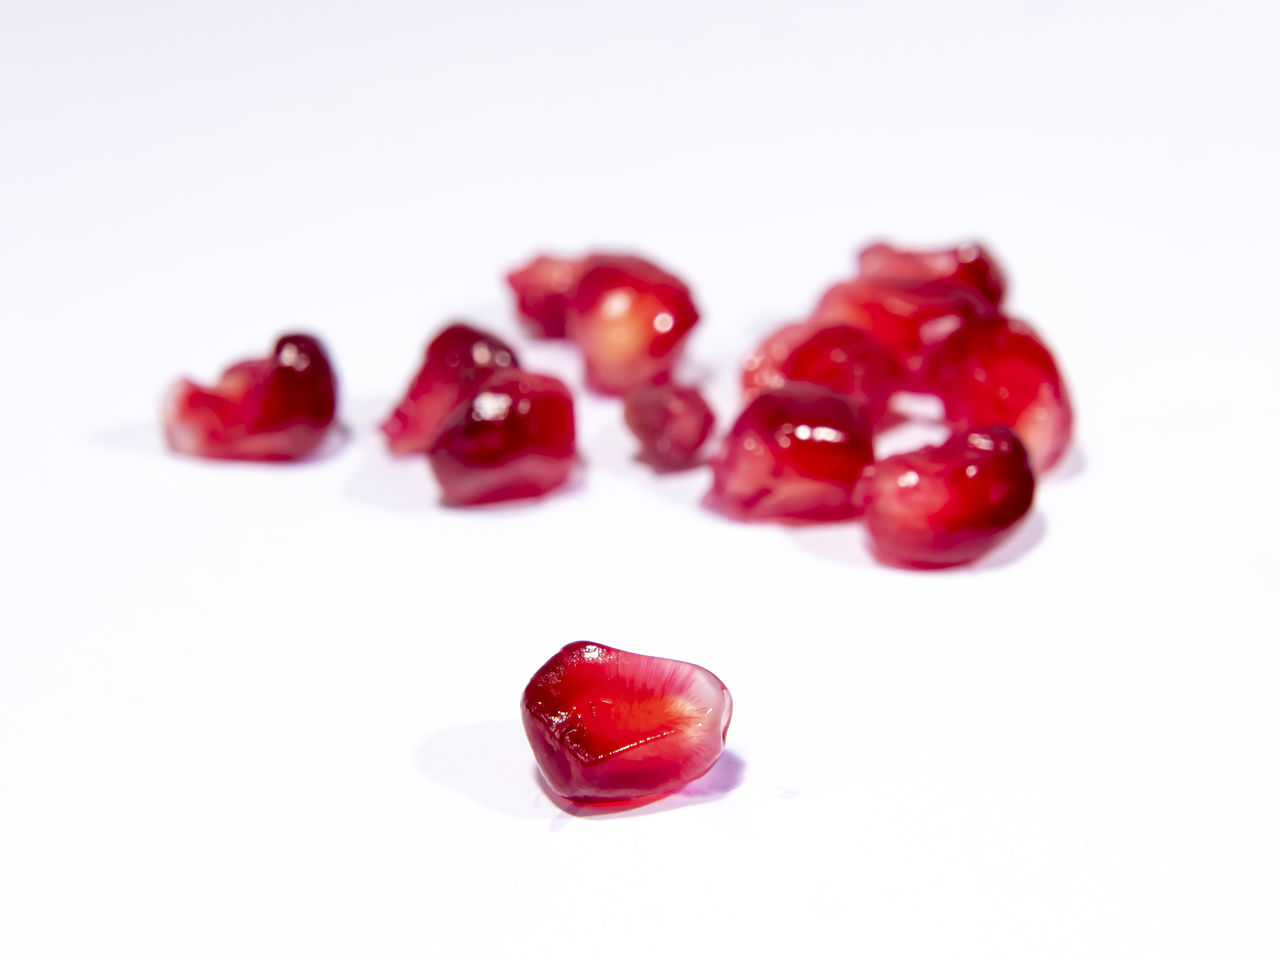 CLOSE-UP OF RED BERRIES OVER WHITE BACKGROUND